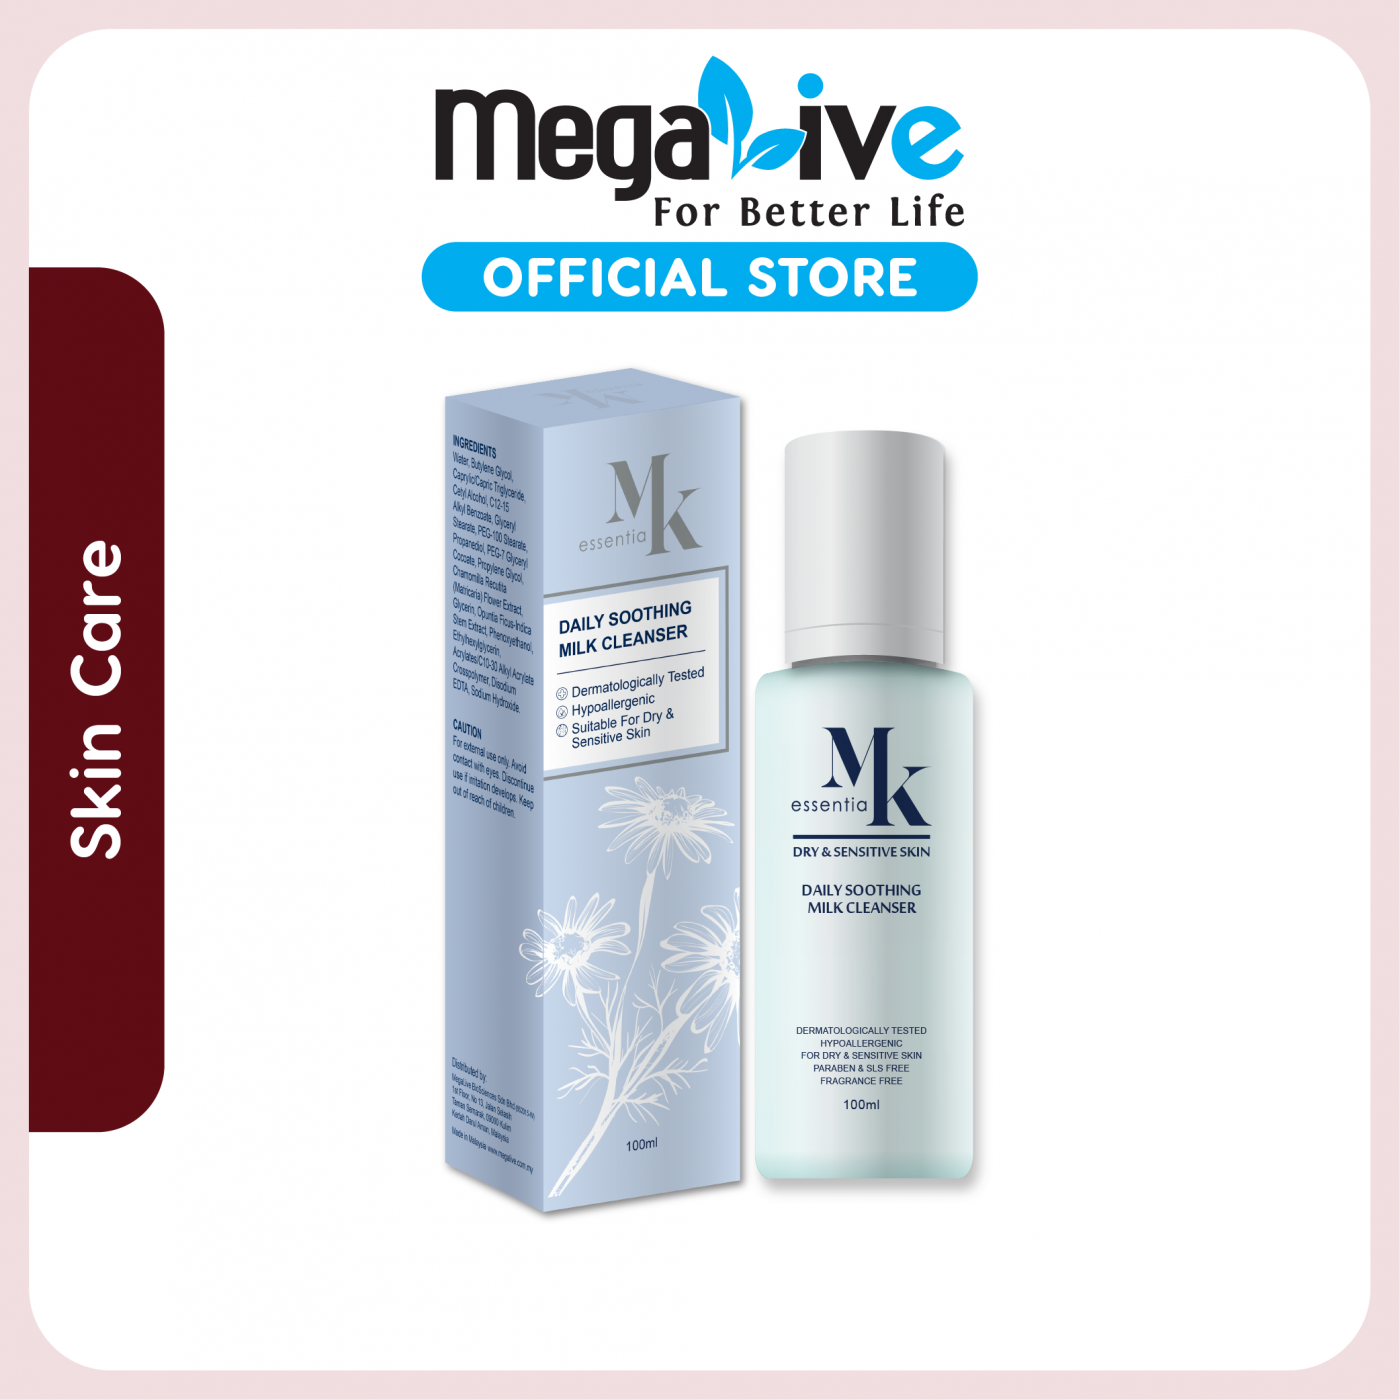 MK essentia Daily Soothing Milk Cleanser 